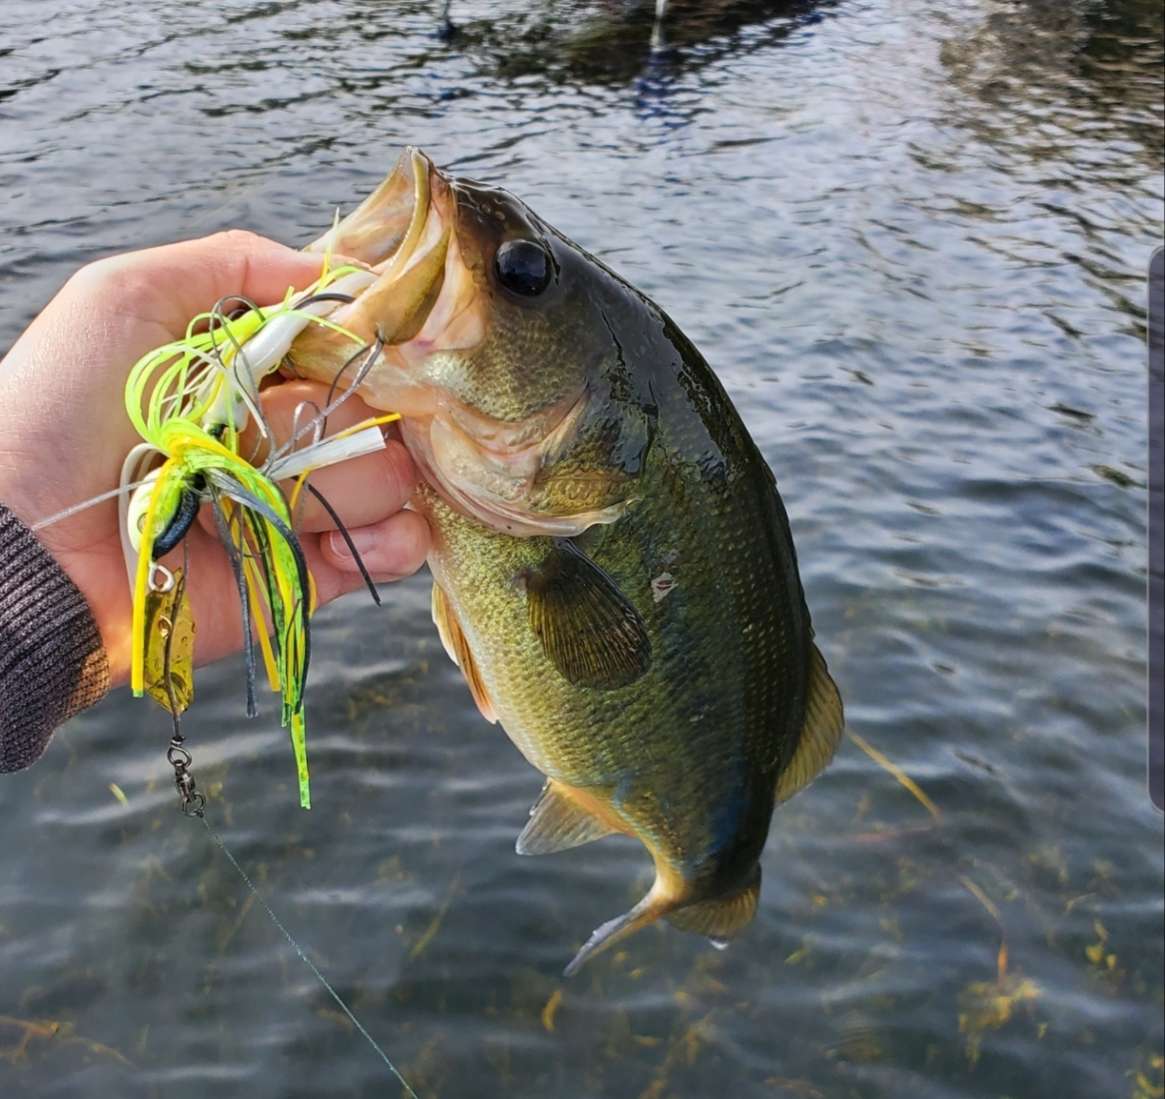 What does a Chatterbait do that a Spinnerbait can't do better